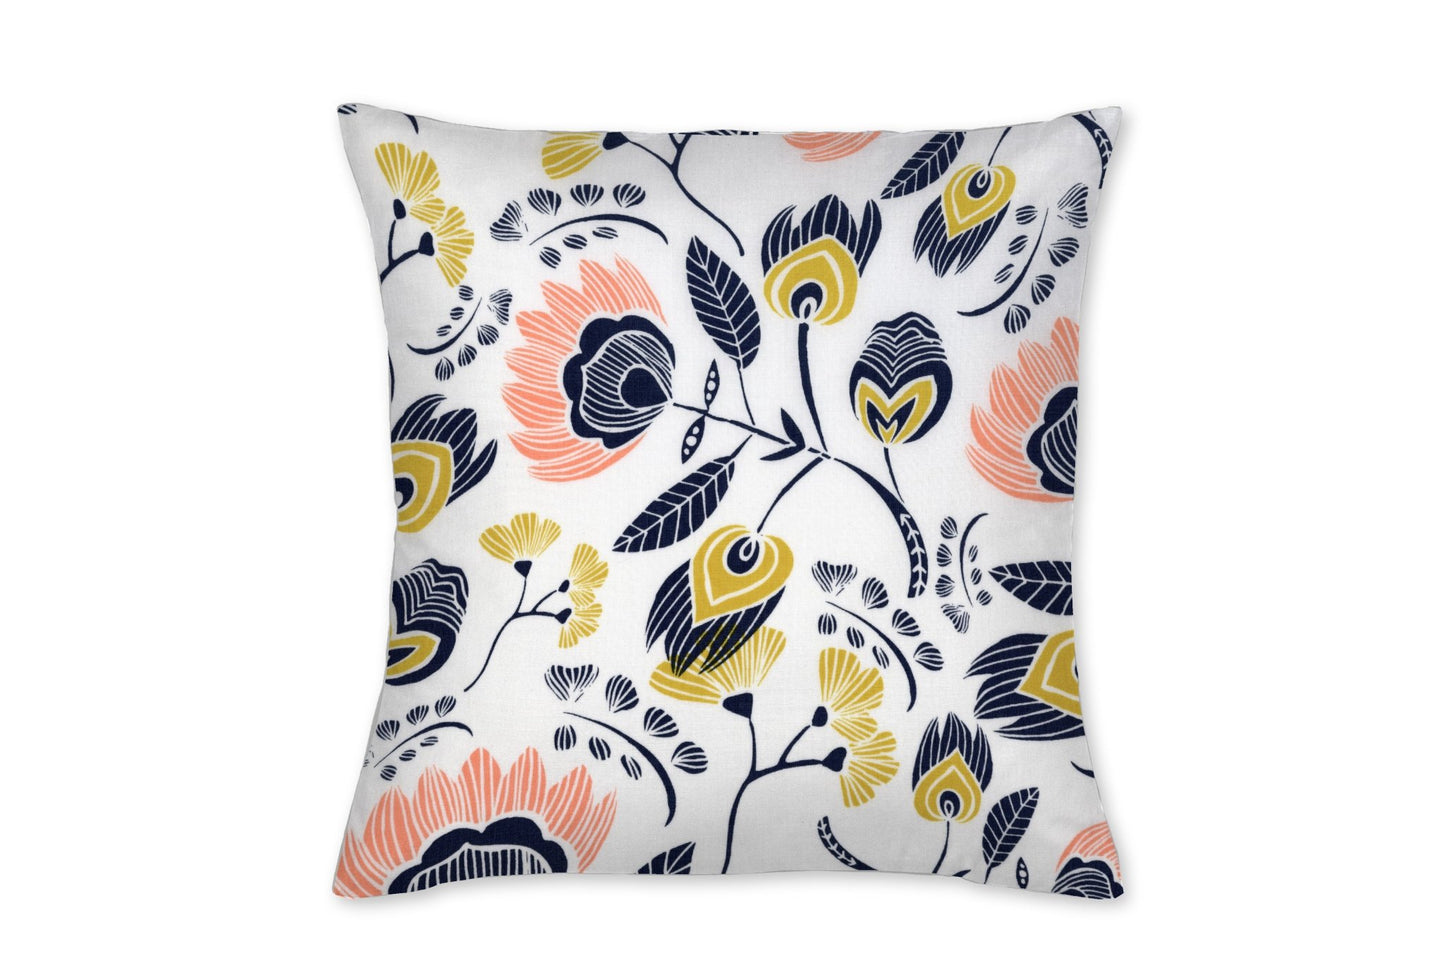 Navy and Peach Flora Throw Pillow - New Arrivals Inc